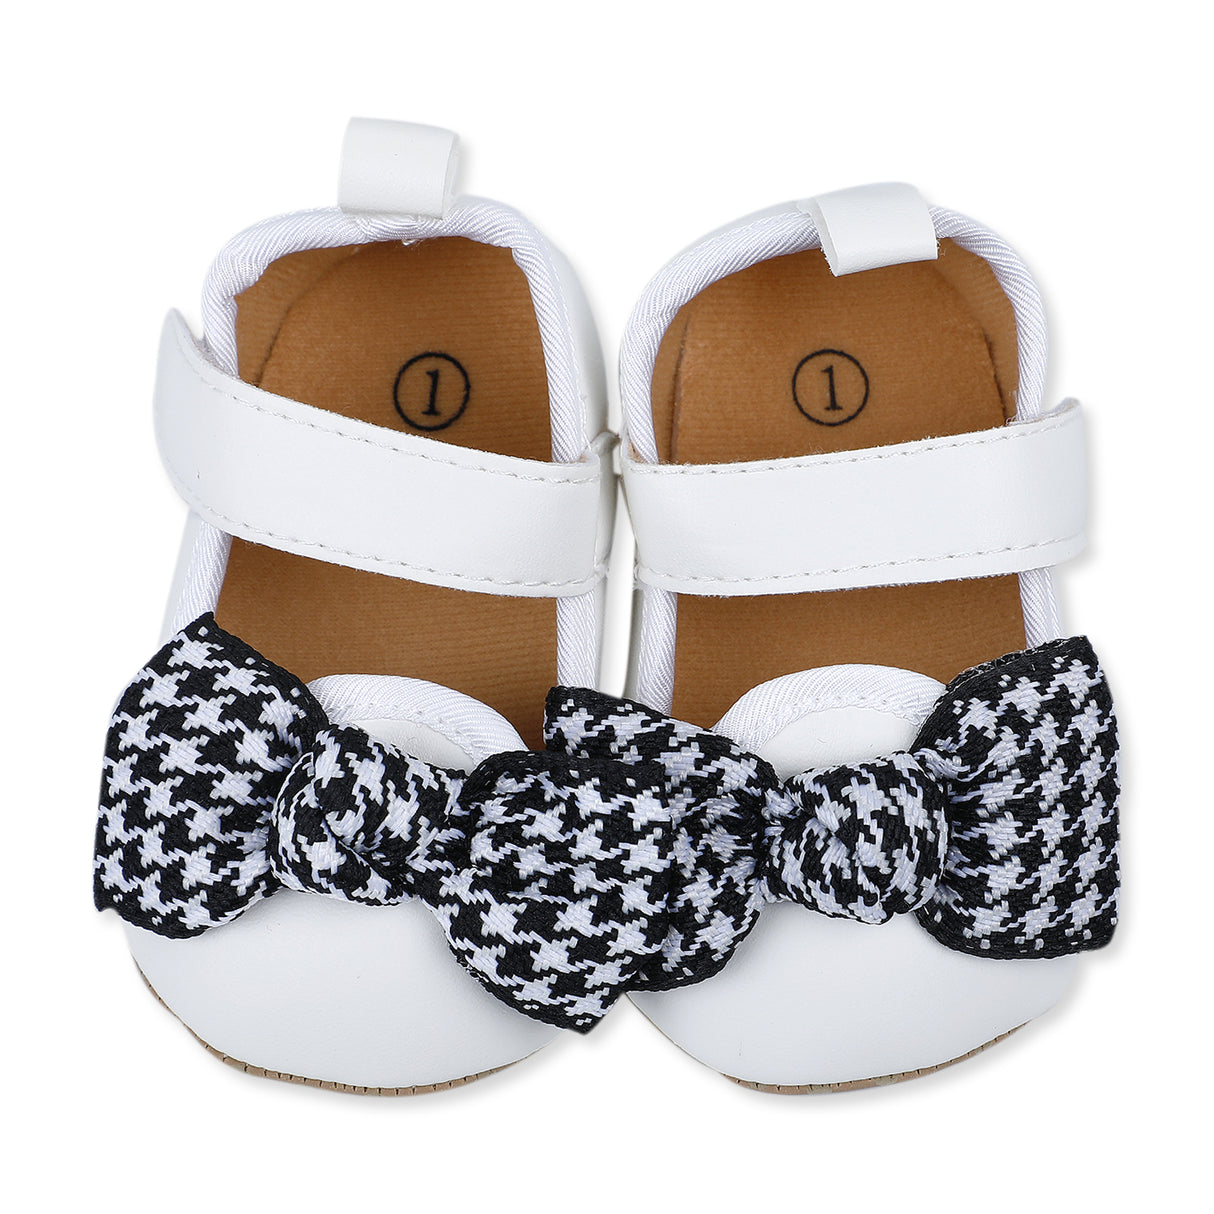 Chex Bow Girls Adorable Anti-Skid Ballerina Booties